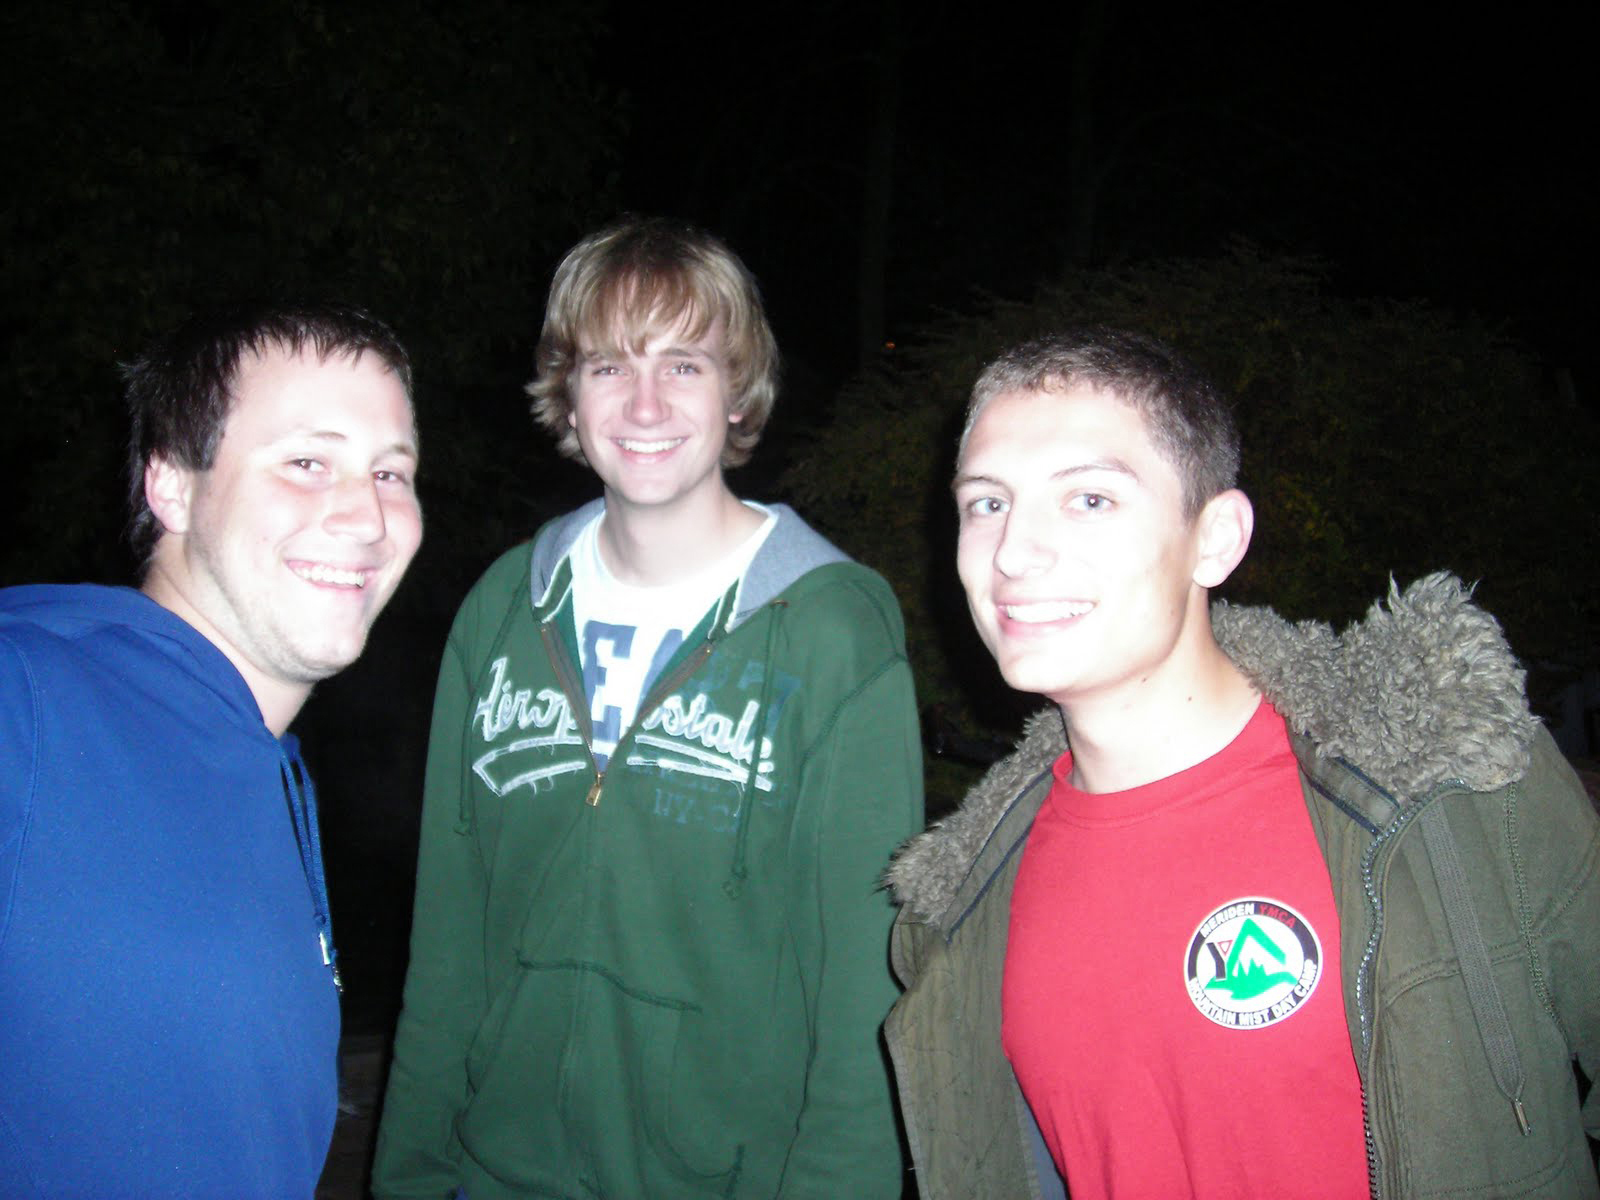  L to R: Jeremy Railing, Aaron Speagle, and Geoff Rolstone
Homecoming 